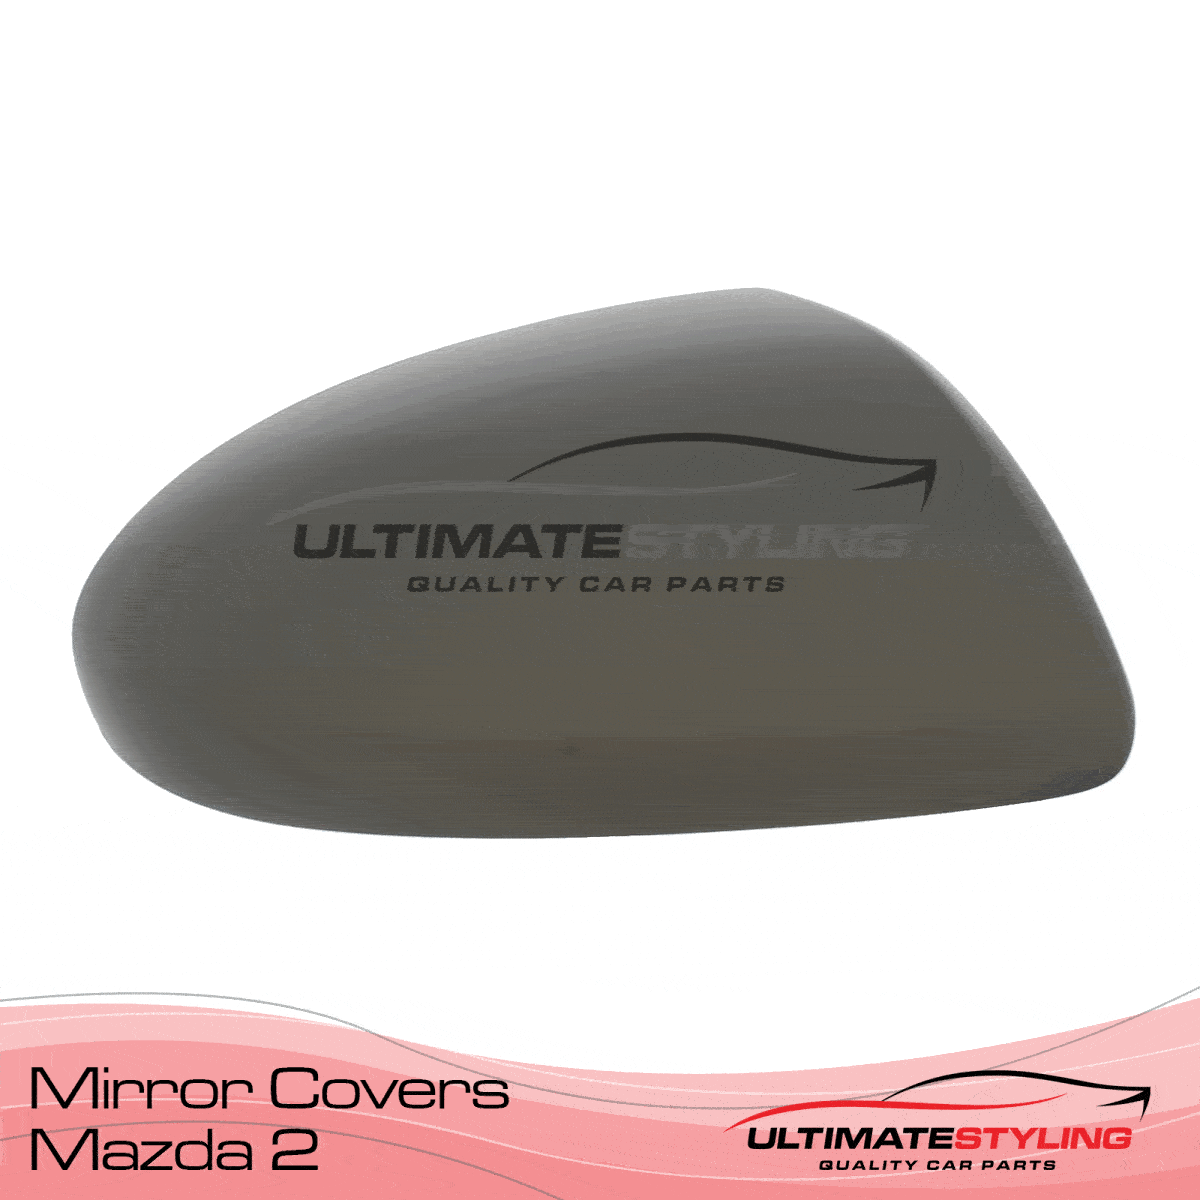 360 degree view of a Mazda 2 wing mirror cover